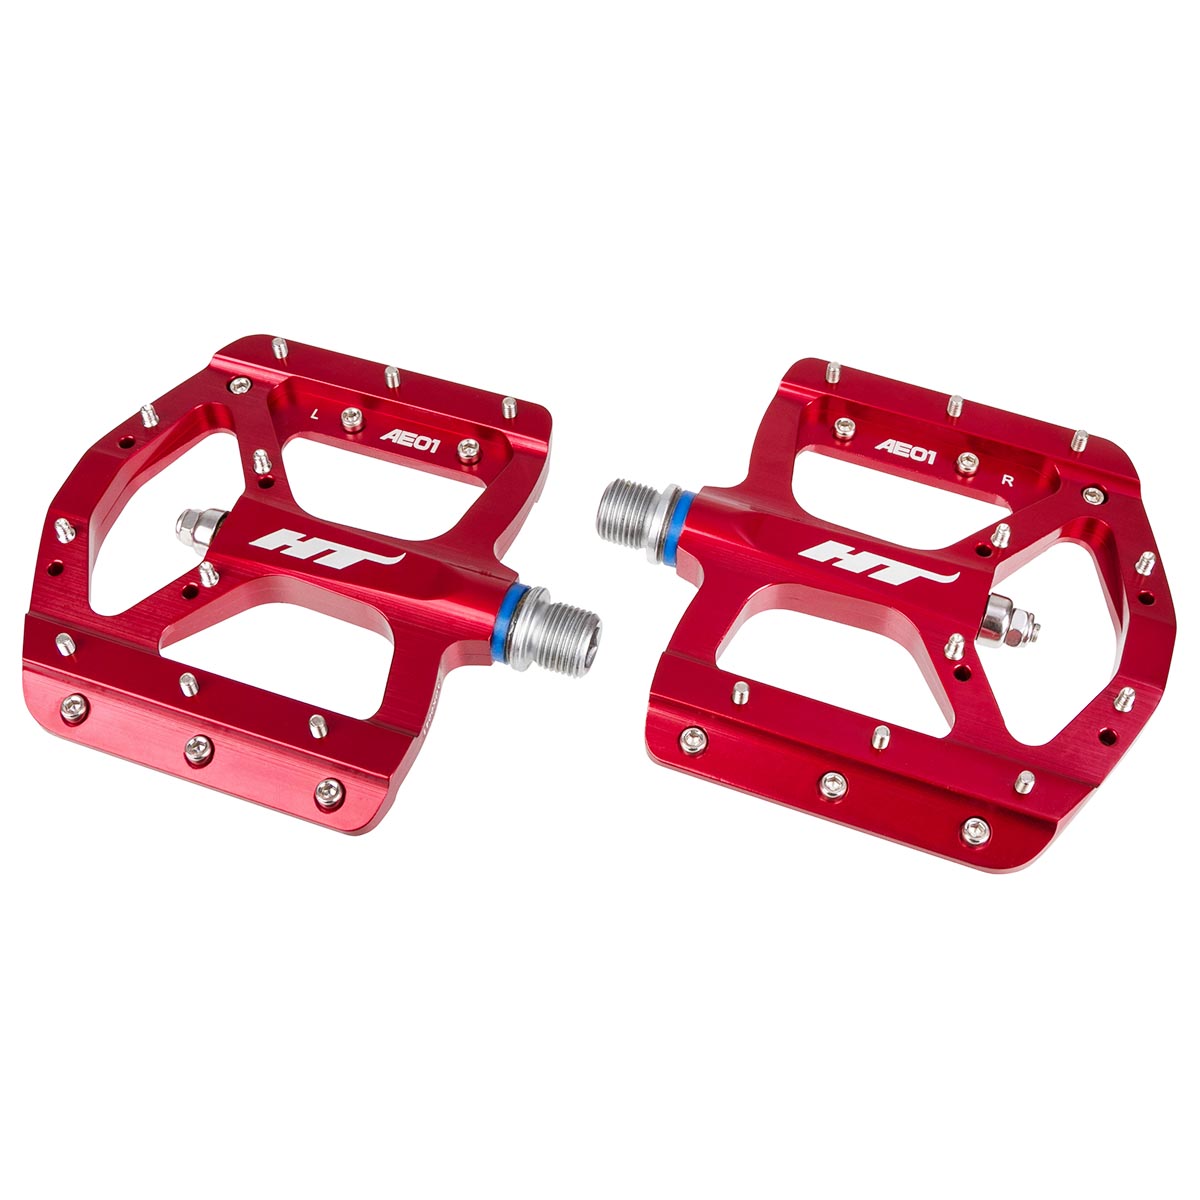 HT Components Pedals AE01 Red